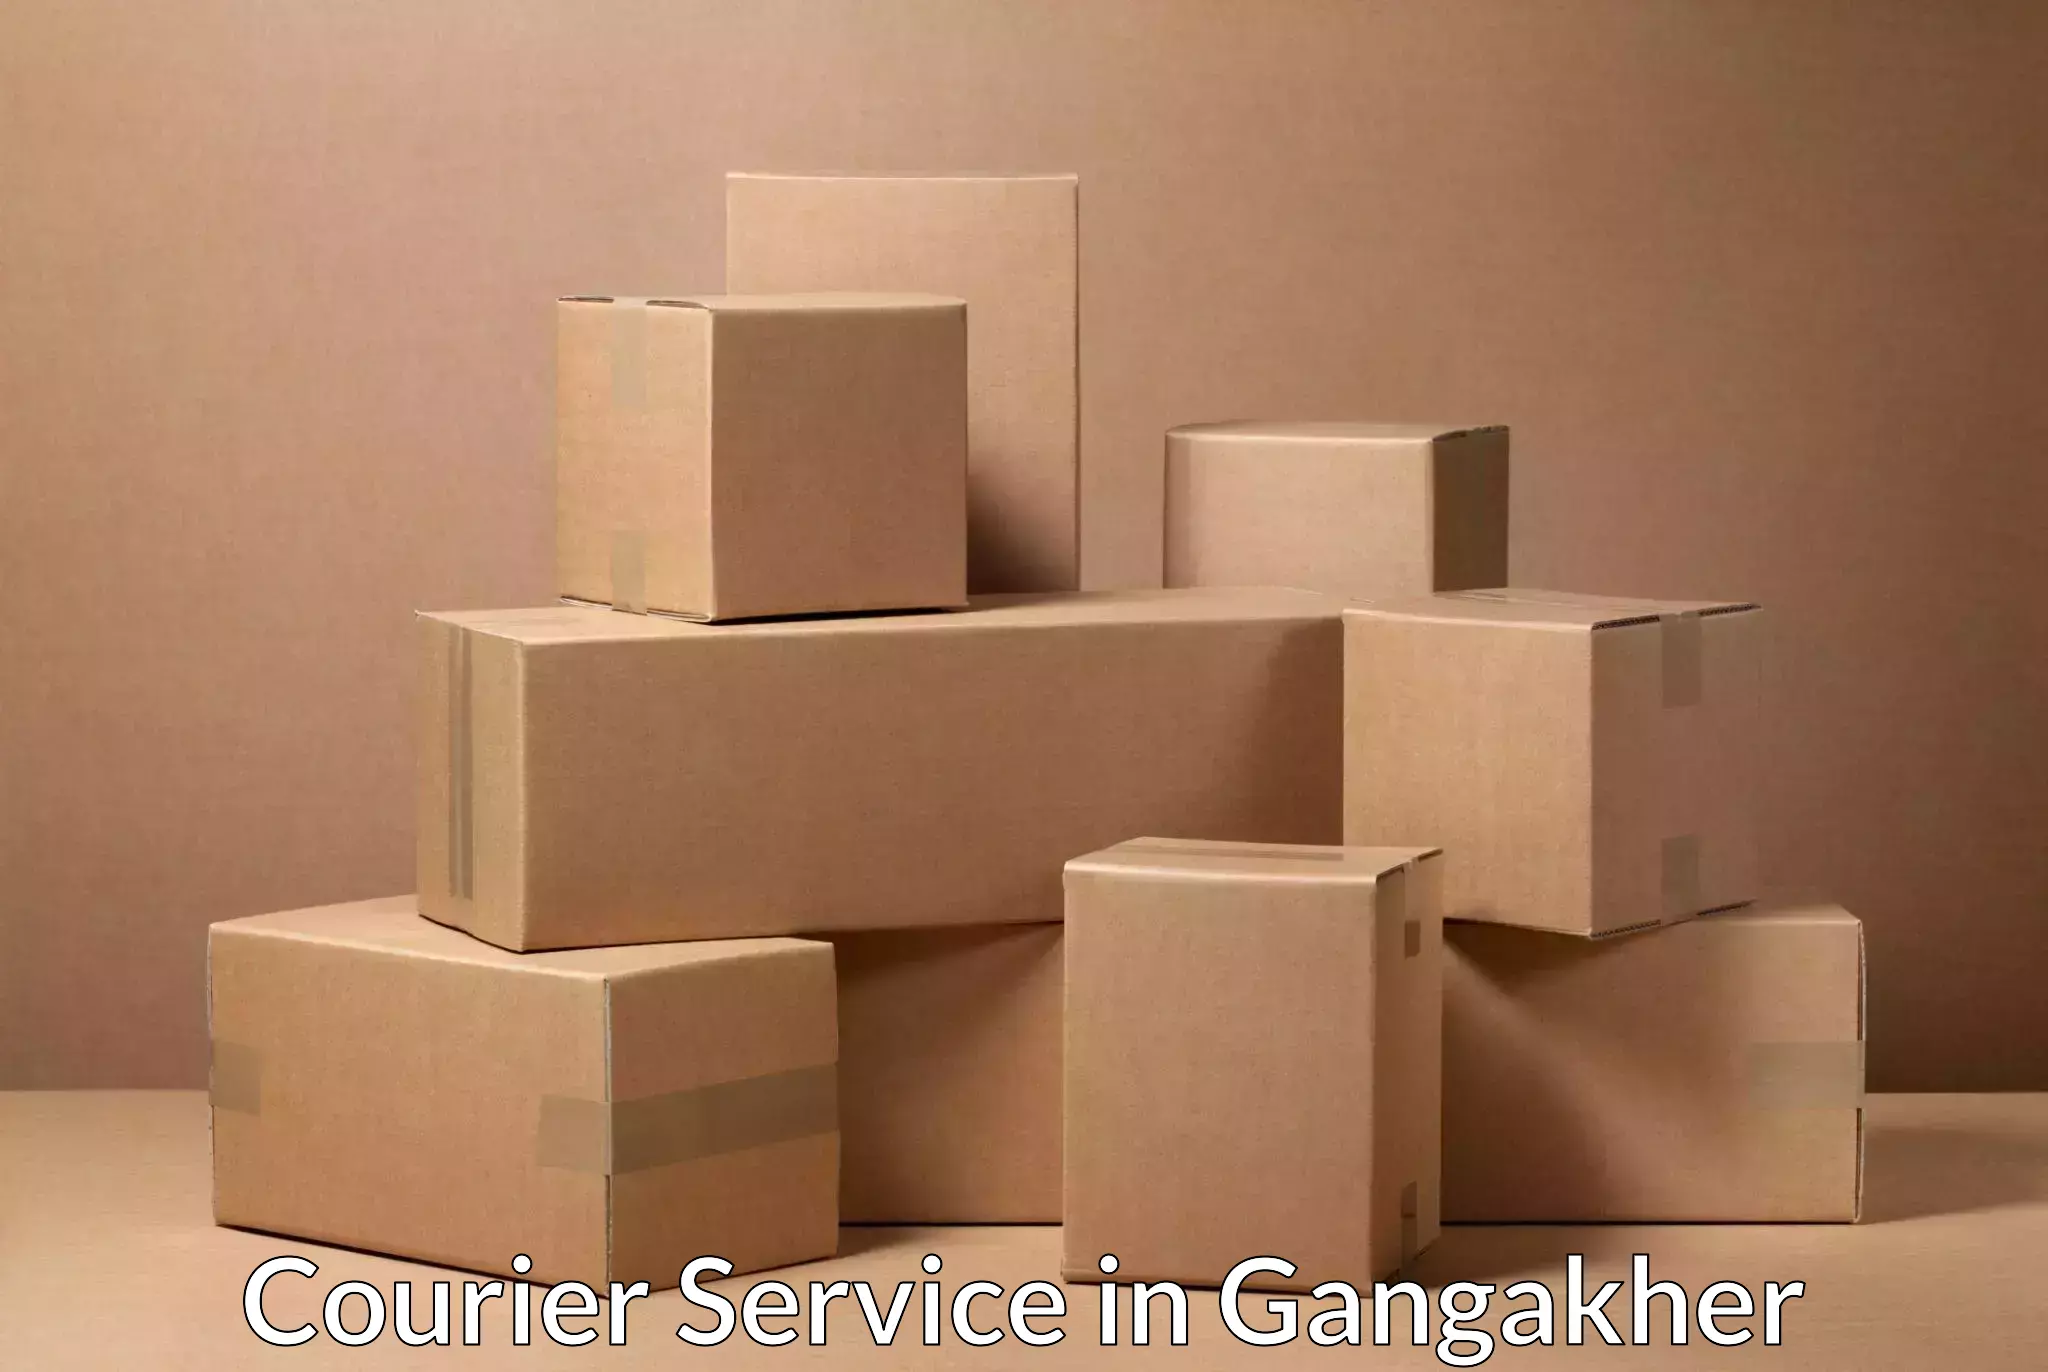 Affordable logistics services in Gangakher